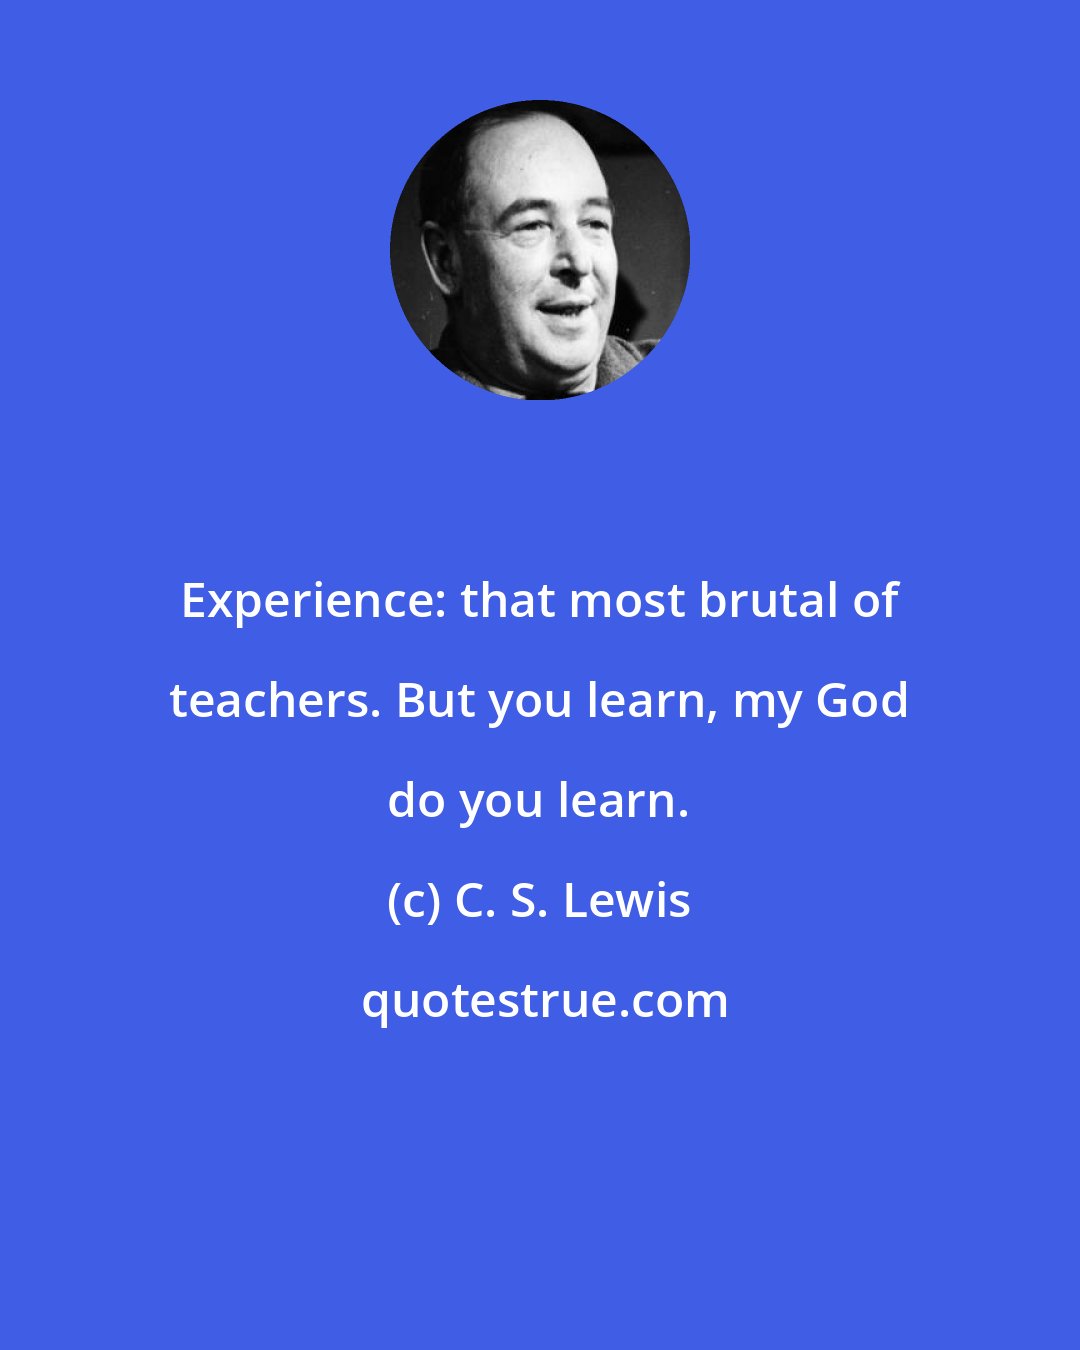 C. S. Lewis: Experience: that most brutal of teachers. But you learn, my God do you learn.